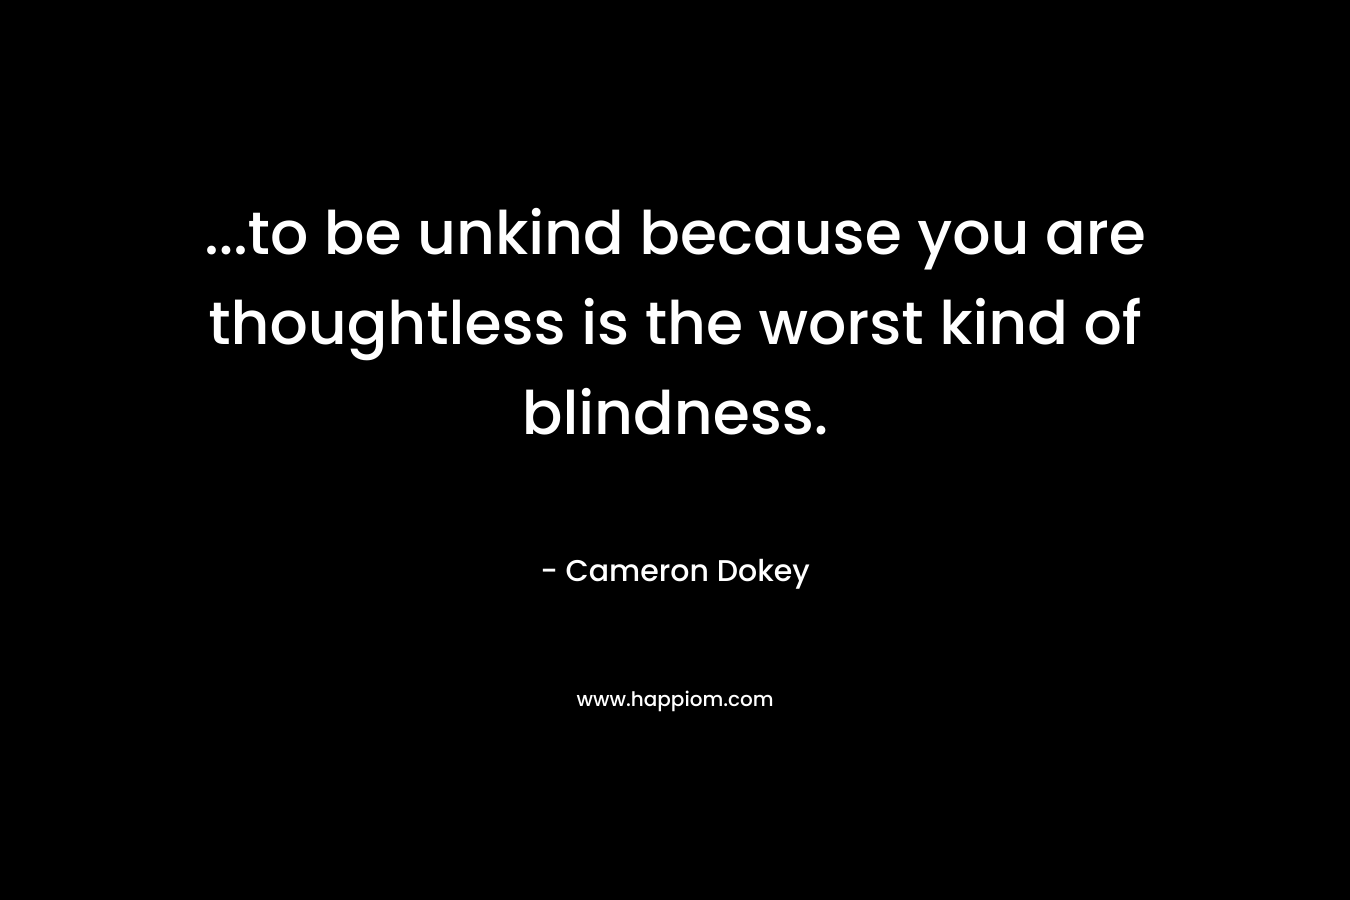 …to be unkind because you are thoughtless is the worst kind of blindness. – Cameron Dokey